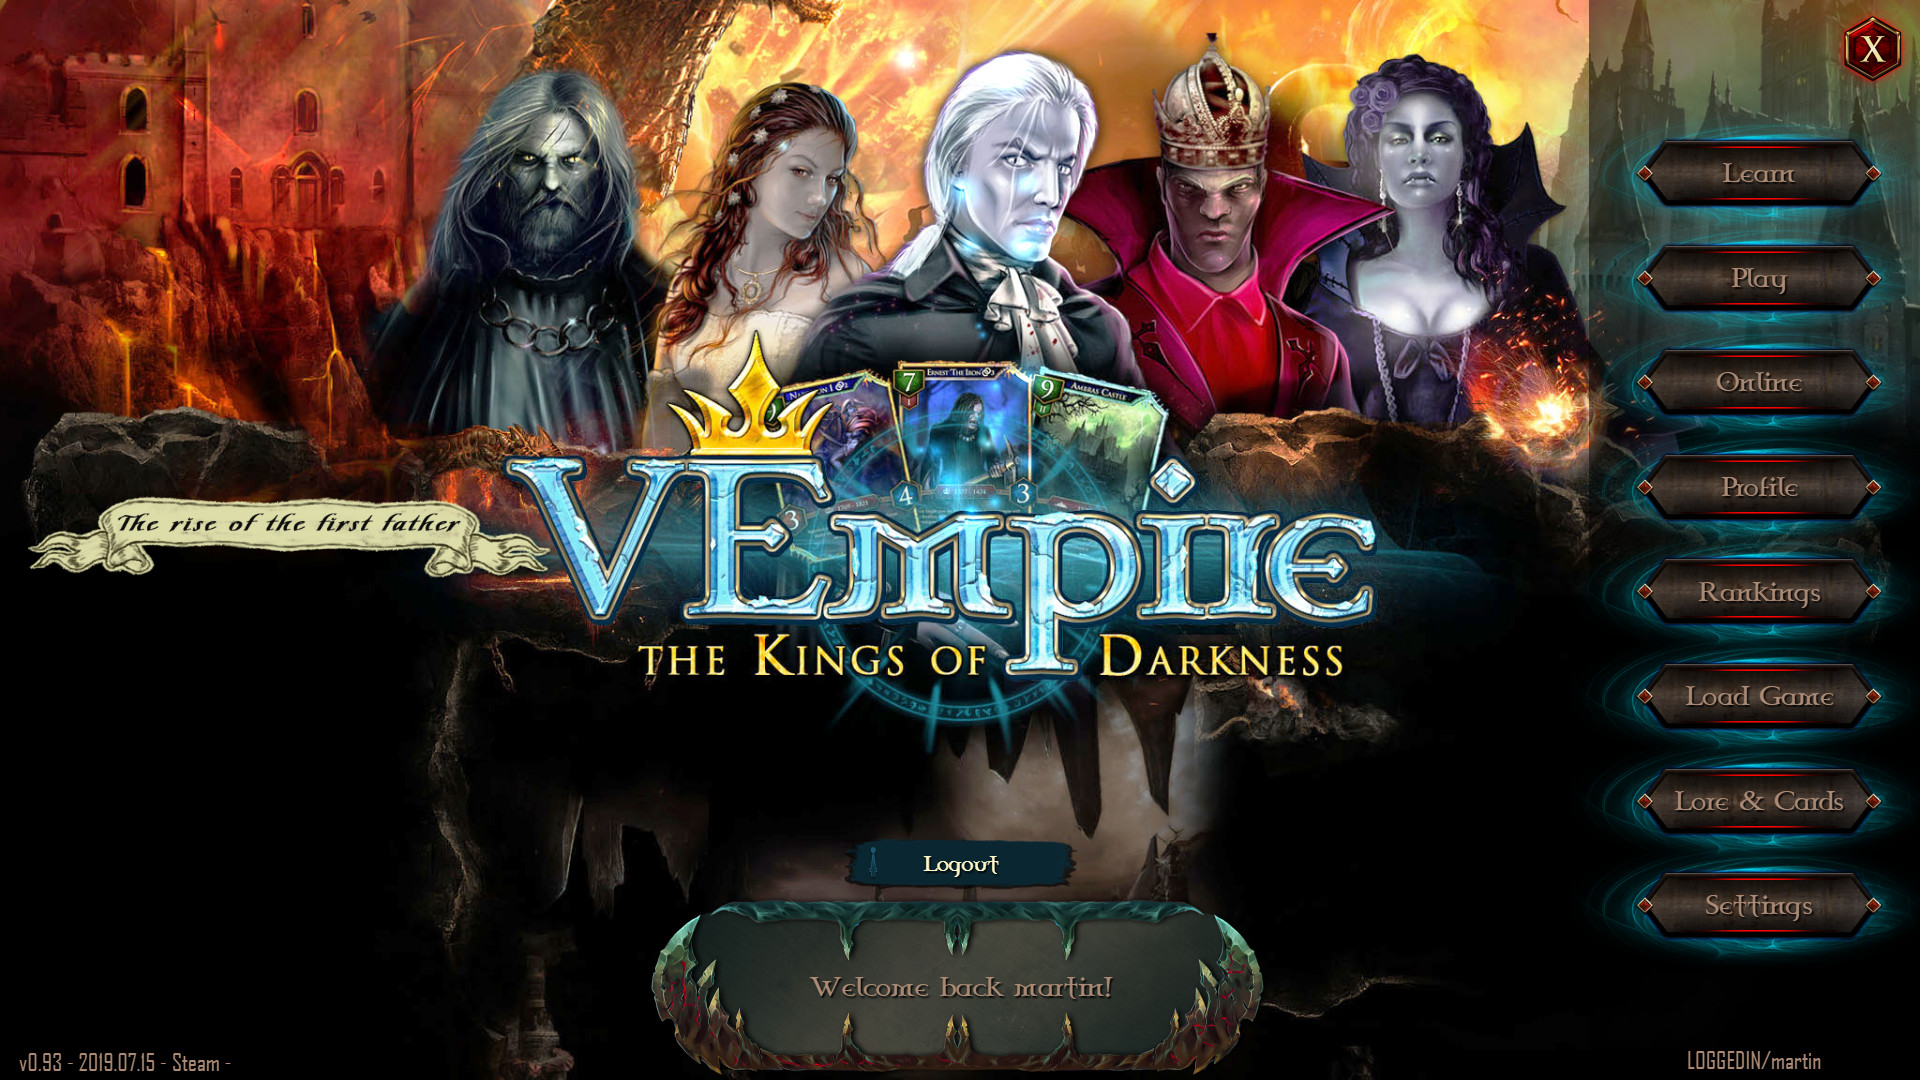 VEmpire - The Kings of Darkness Free Download